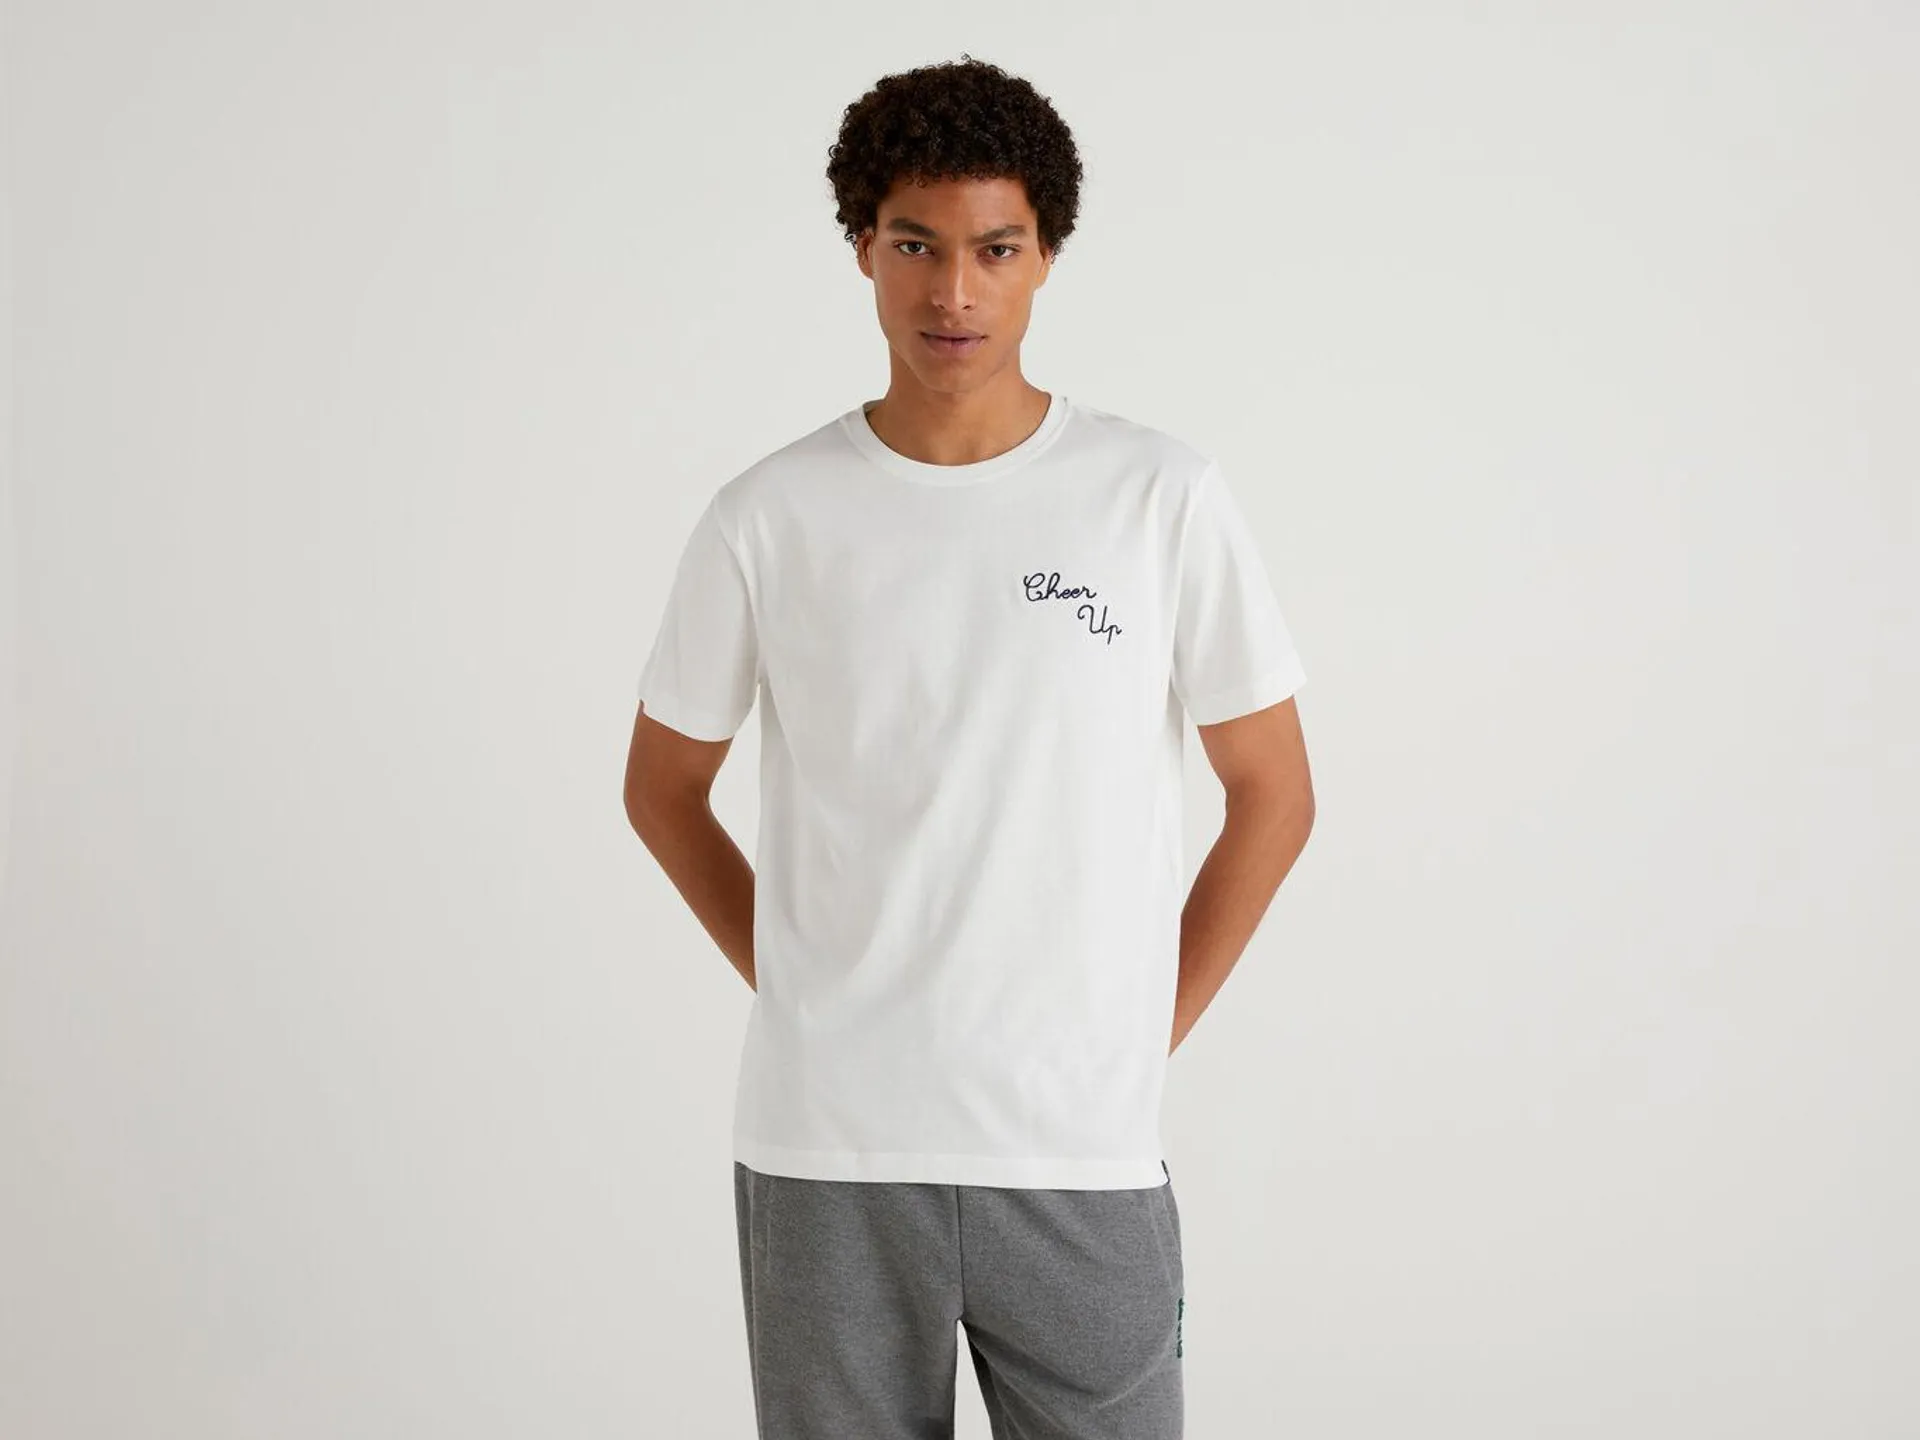 Relaxed fit t-shirt with embroidery